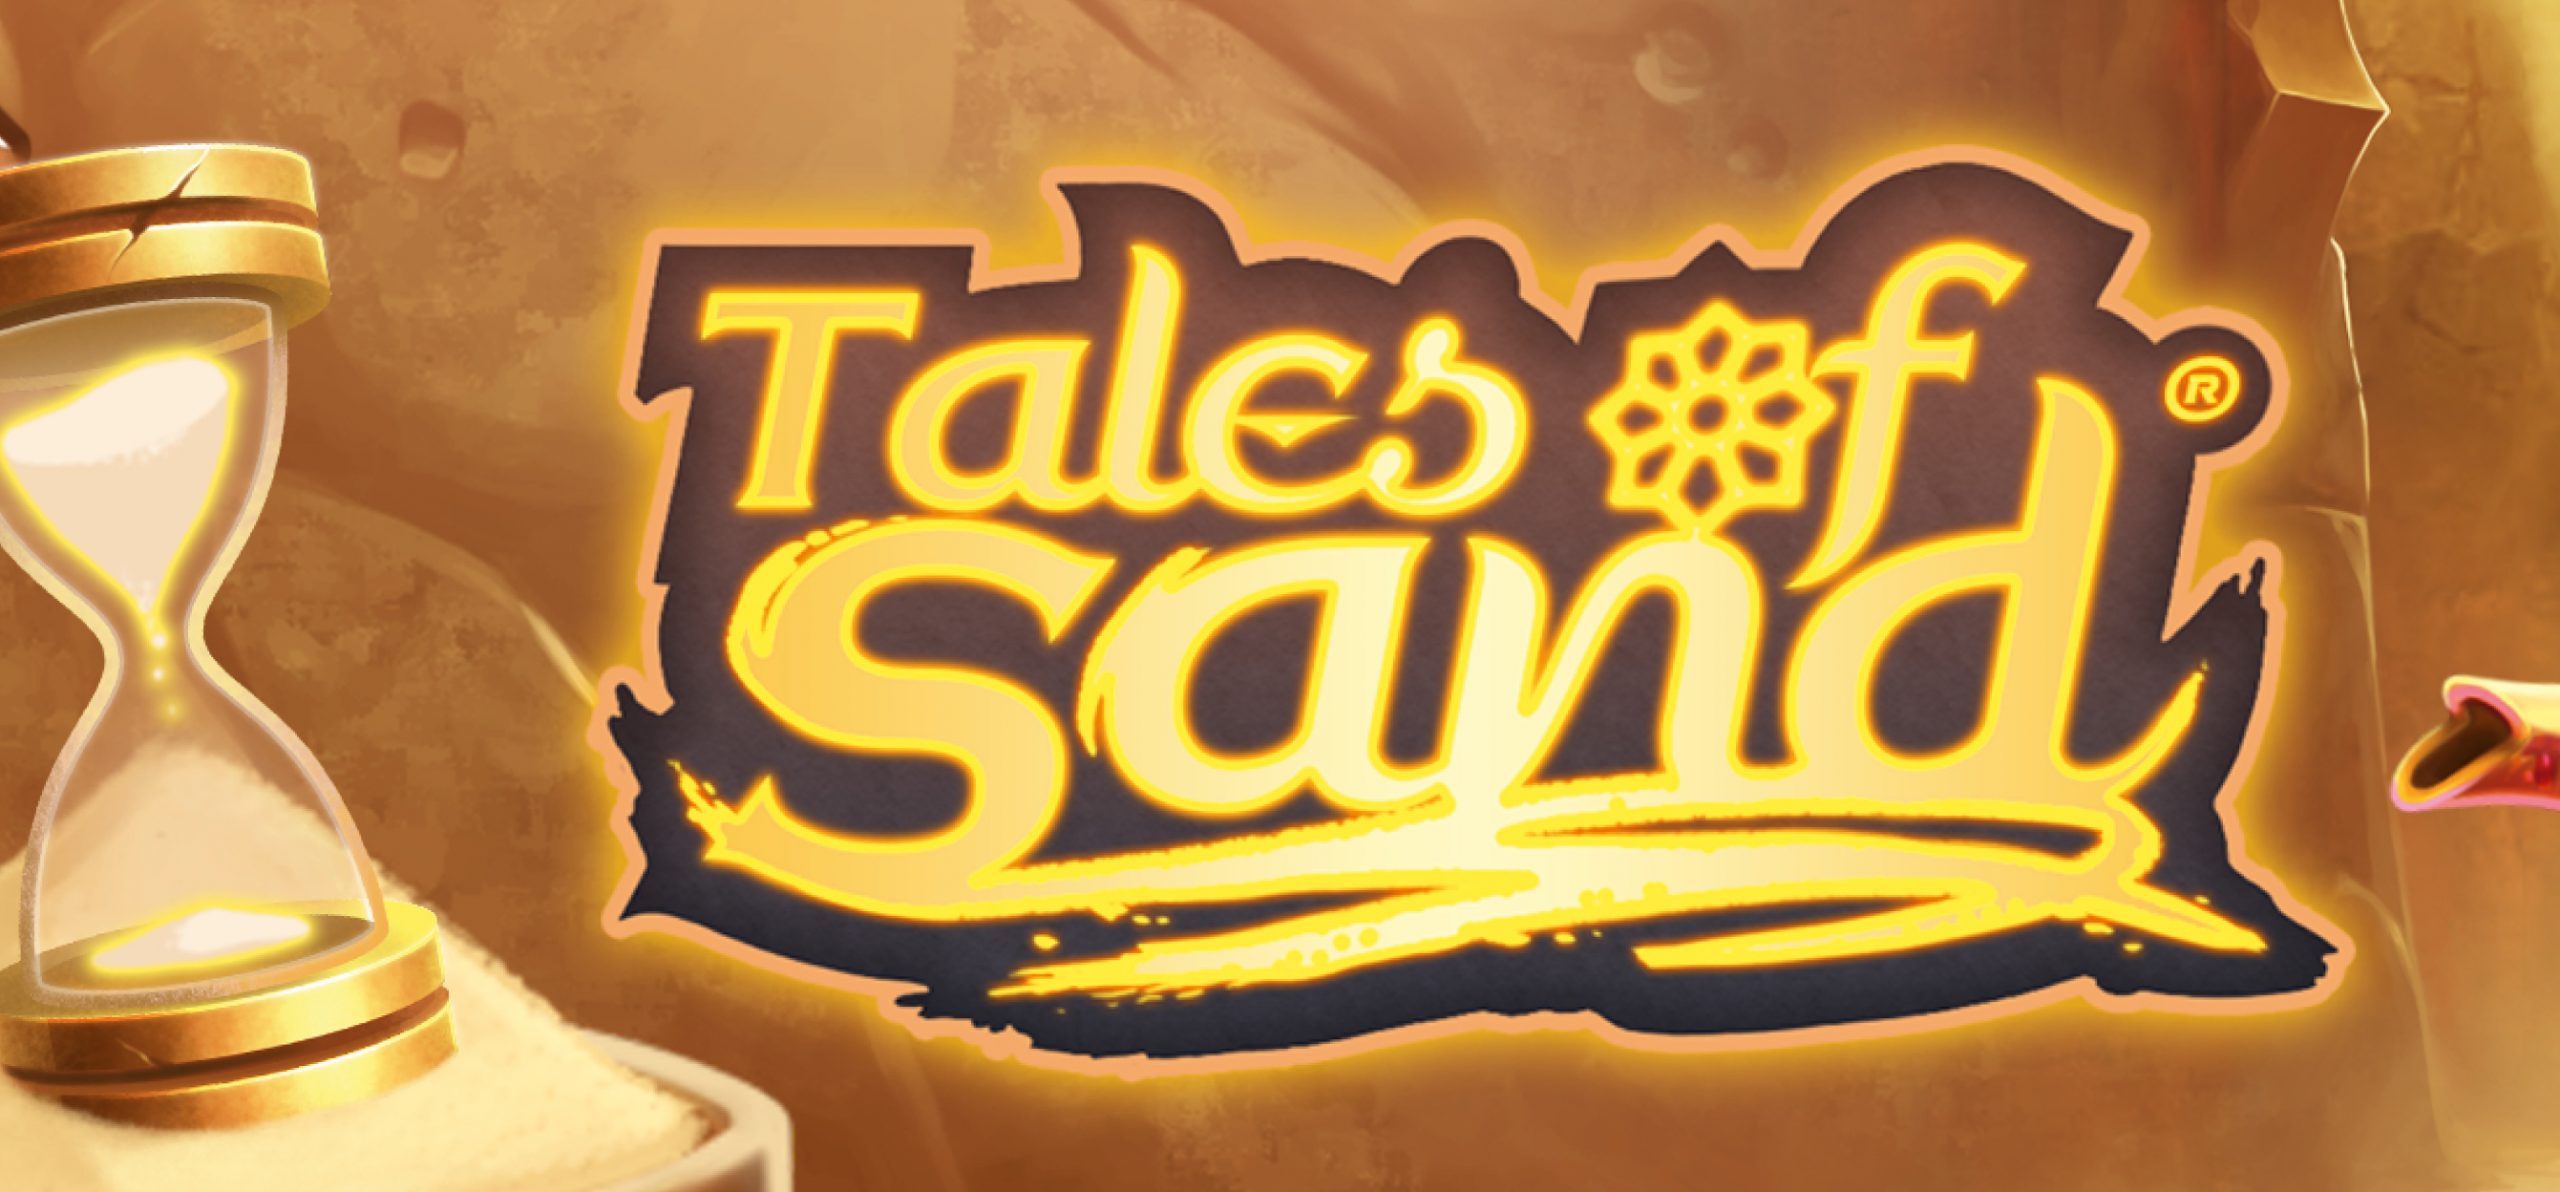 Tales of Sand is a dice game at betFIRST Casino with a unique desert theme